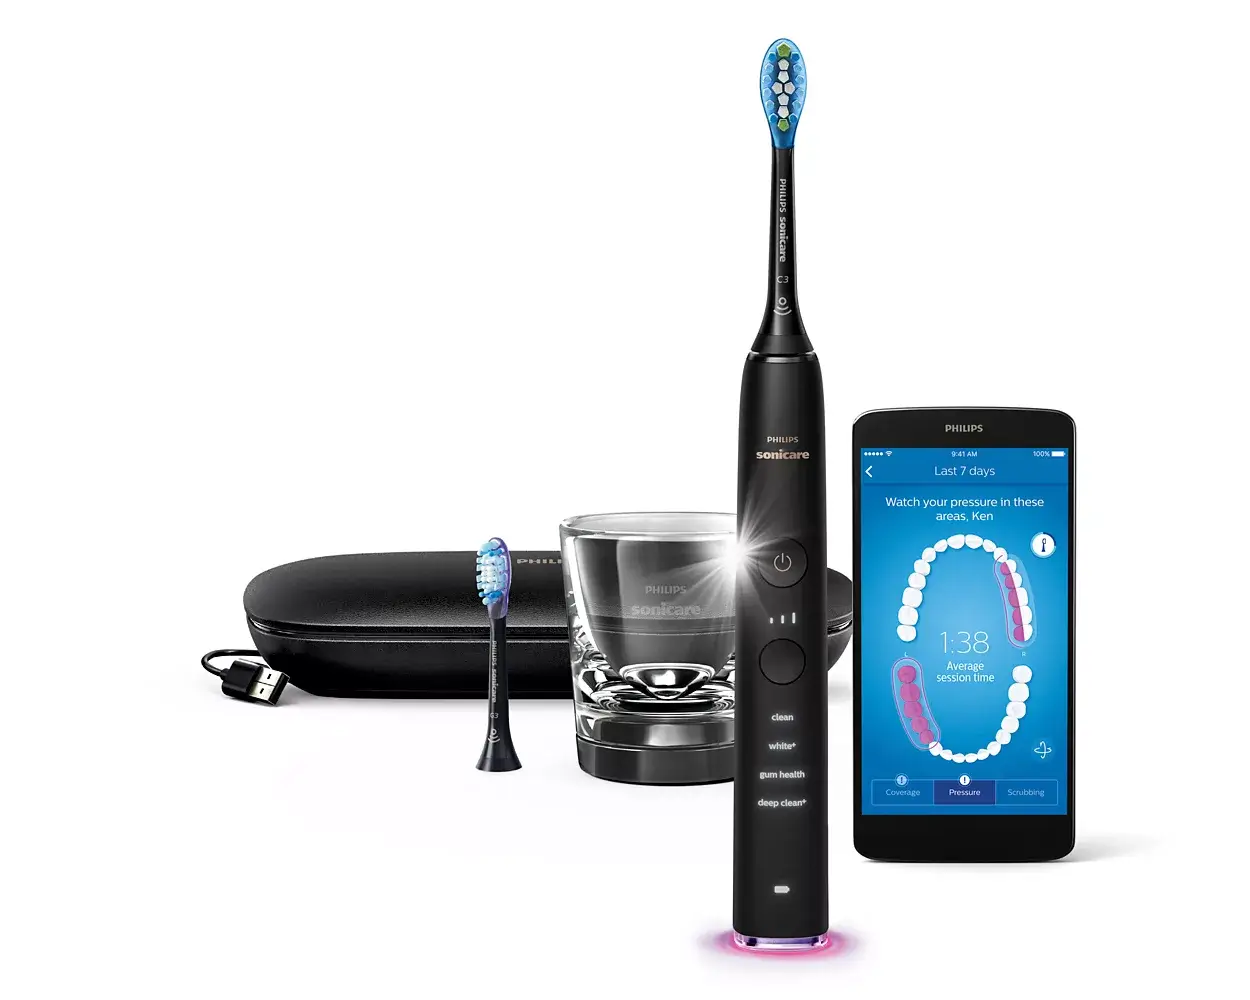 Philips Sonicare DiamondClean Smart 9350 electric toothbrush - Customizable smart brush heads, app tracking, 5 brushing modes for whitening, plaque control and gum care.